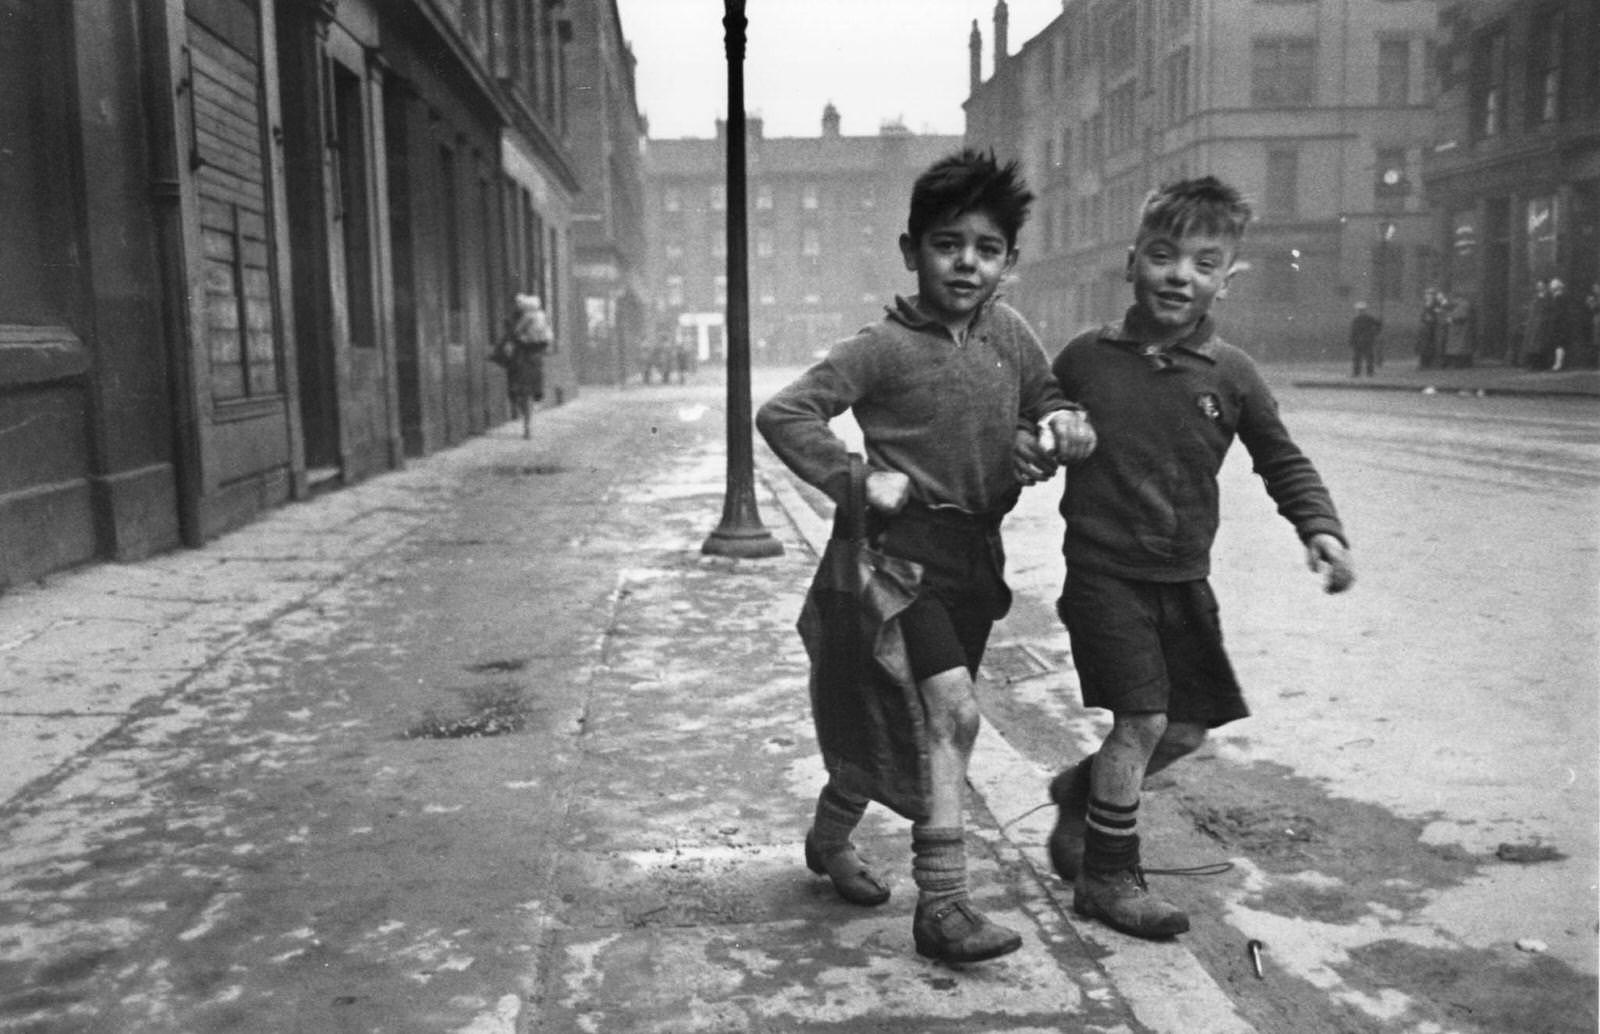 Two boys in the Gorbals area of Glasgow, 1948